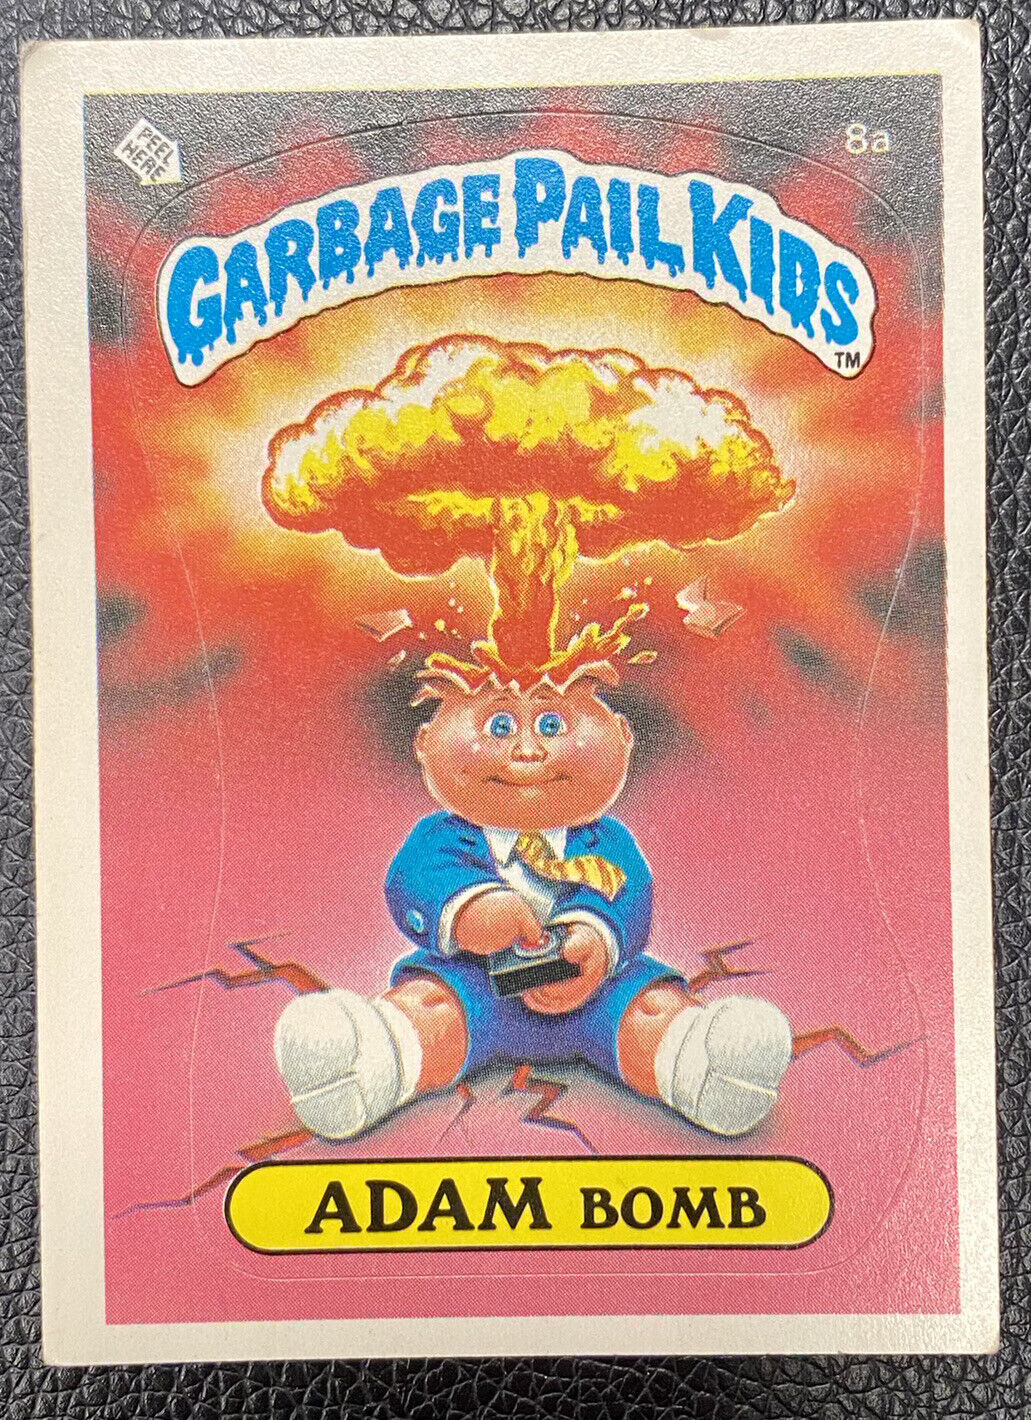 1985 TOPPS Garbage Pail Kids Series 1 Adam Bomb 8a Cheaters License Card XF